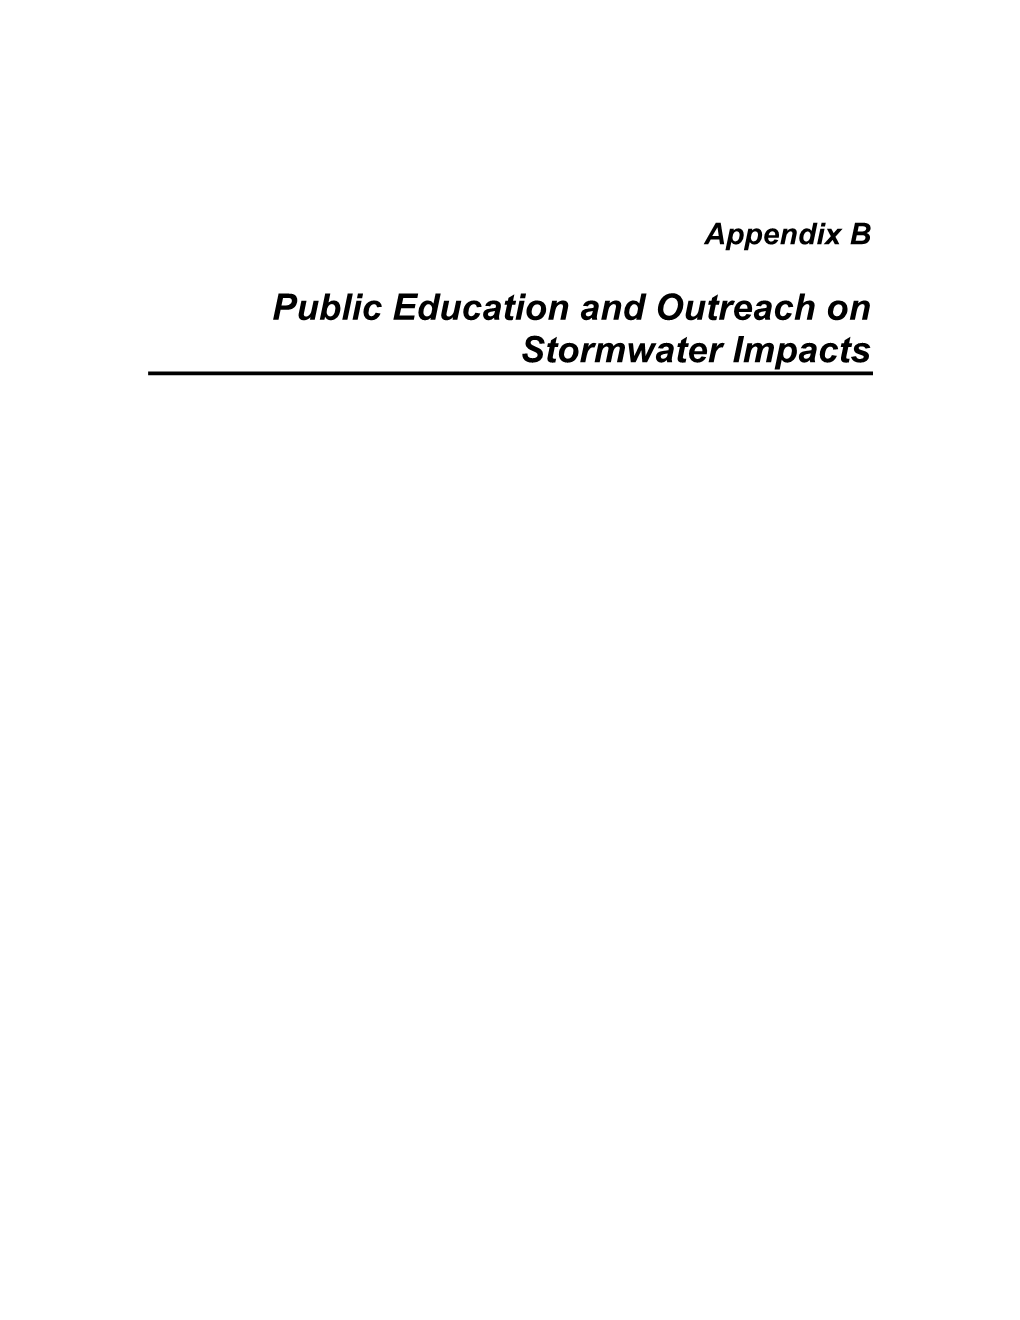 Appendix B Public Education and Outreach on Stormwater Impacts